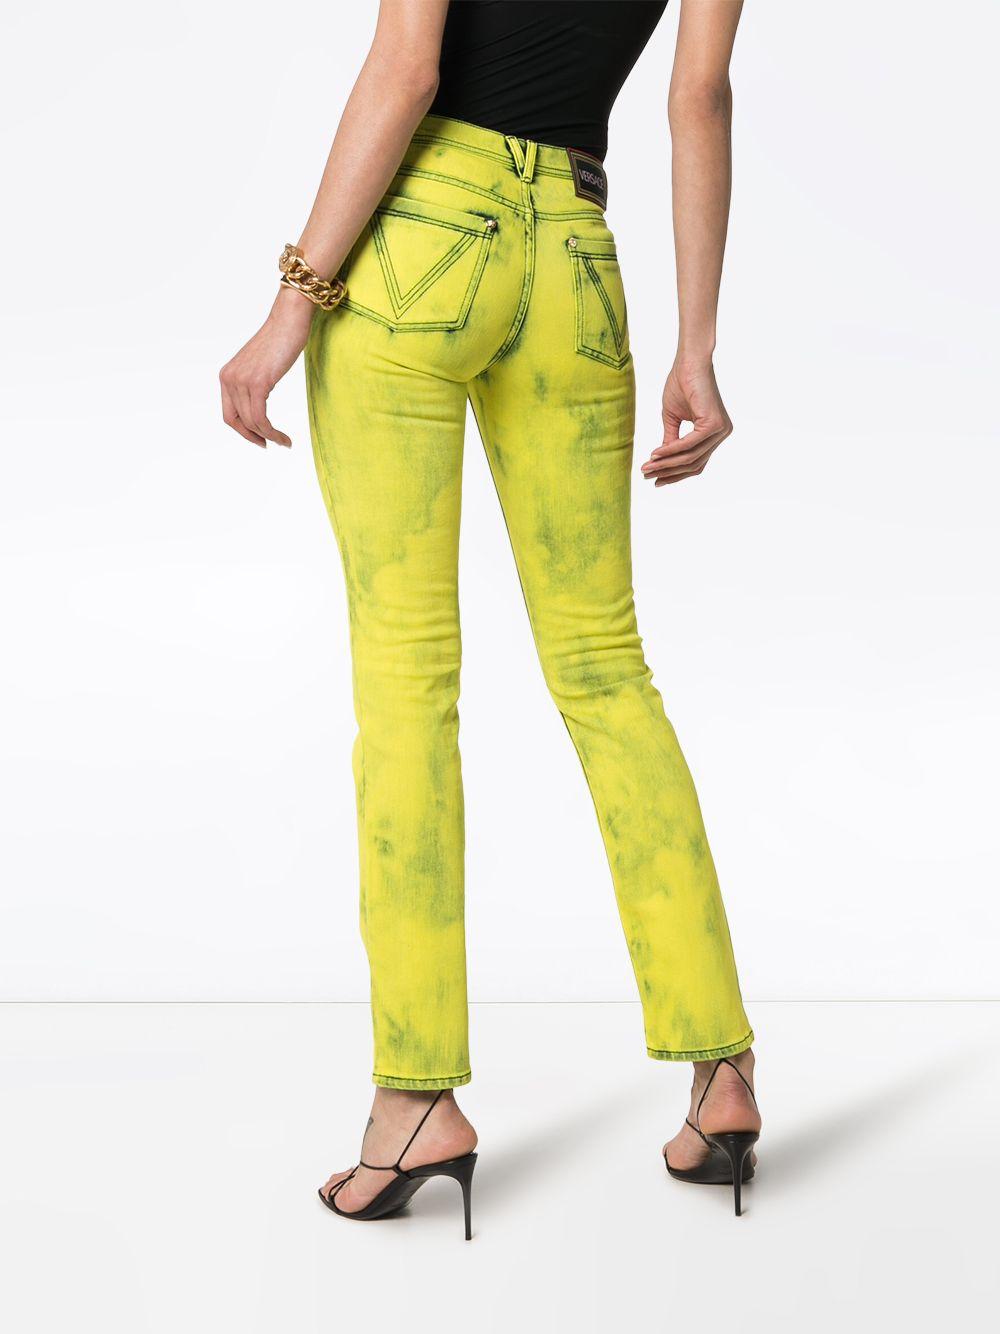 versace yellow jeans